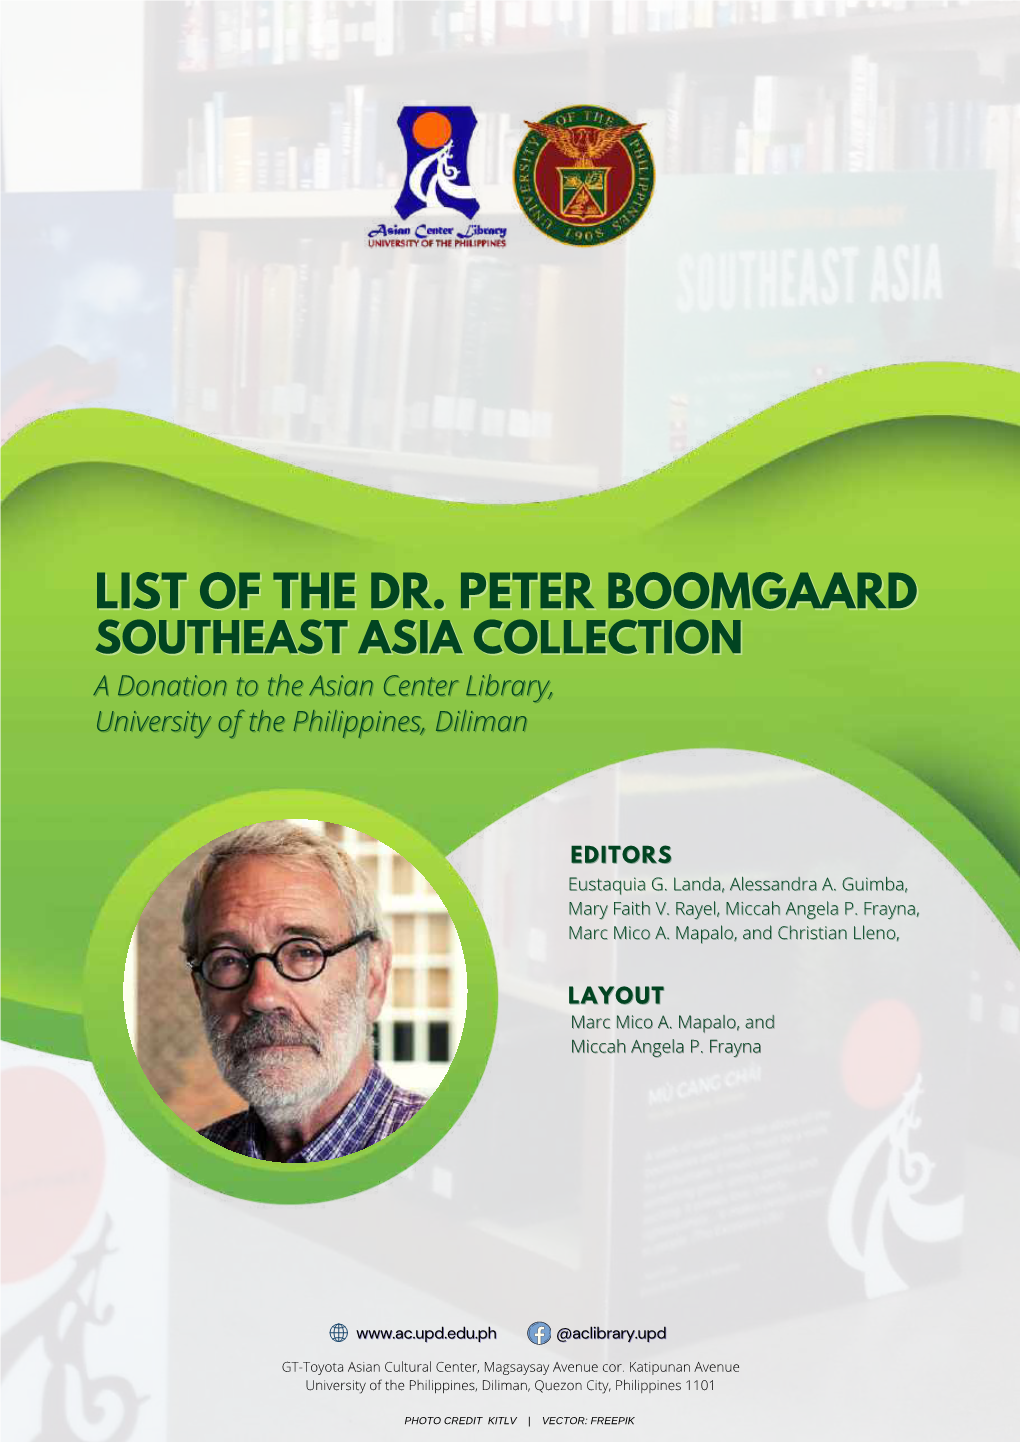 List of the Dr. Peter Boomgaard